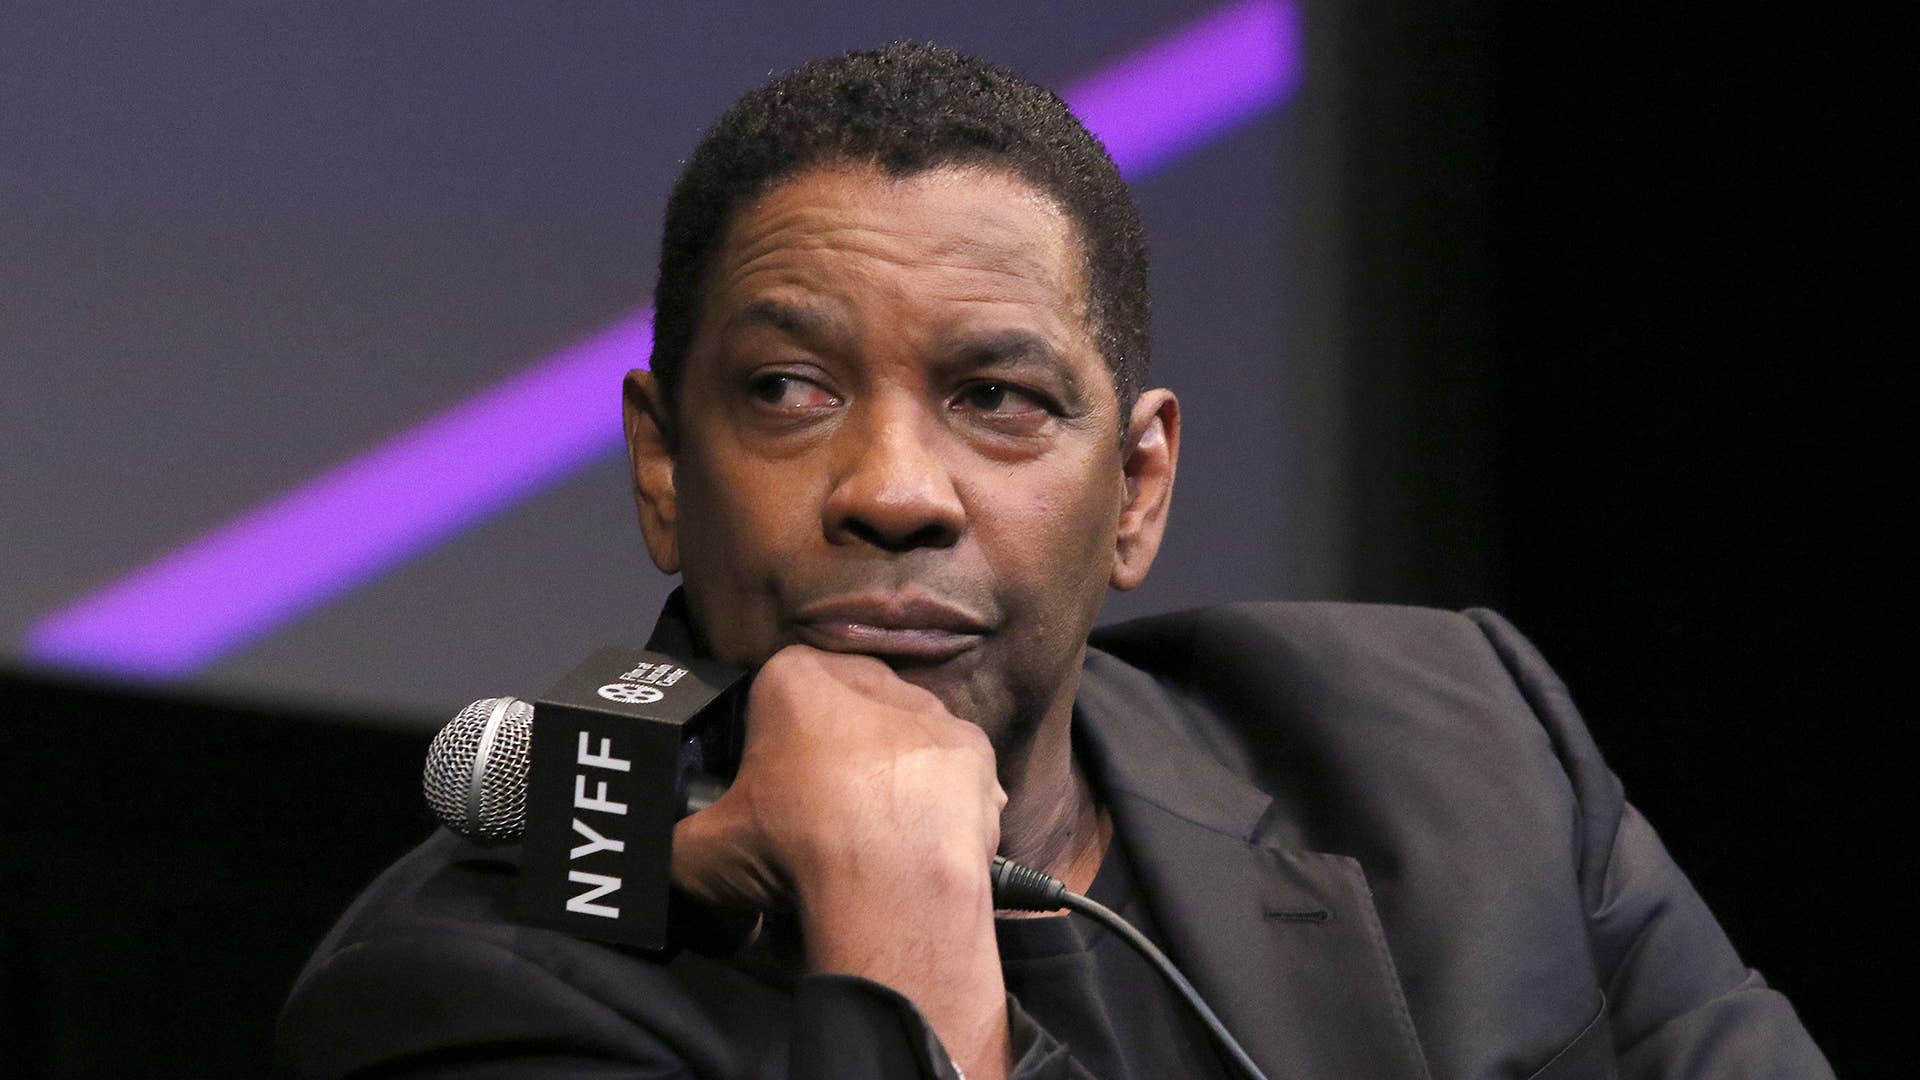 Actor Denzel Washington attends a press conference for the 59th New York Film Festival